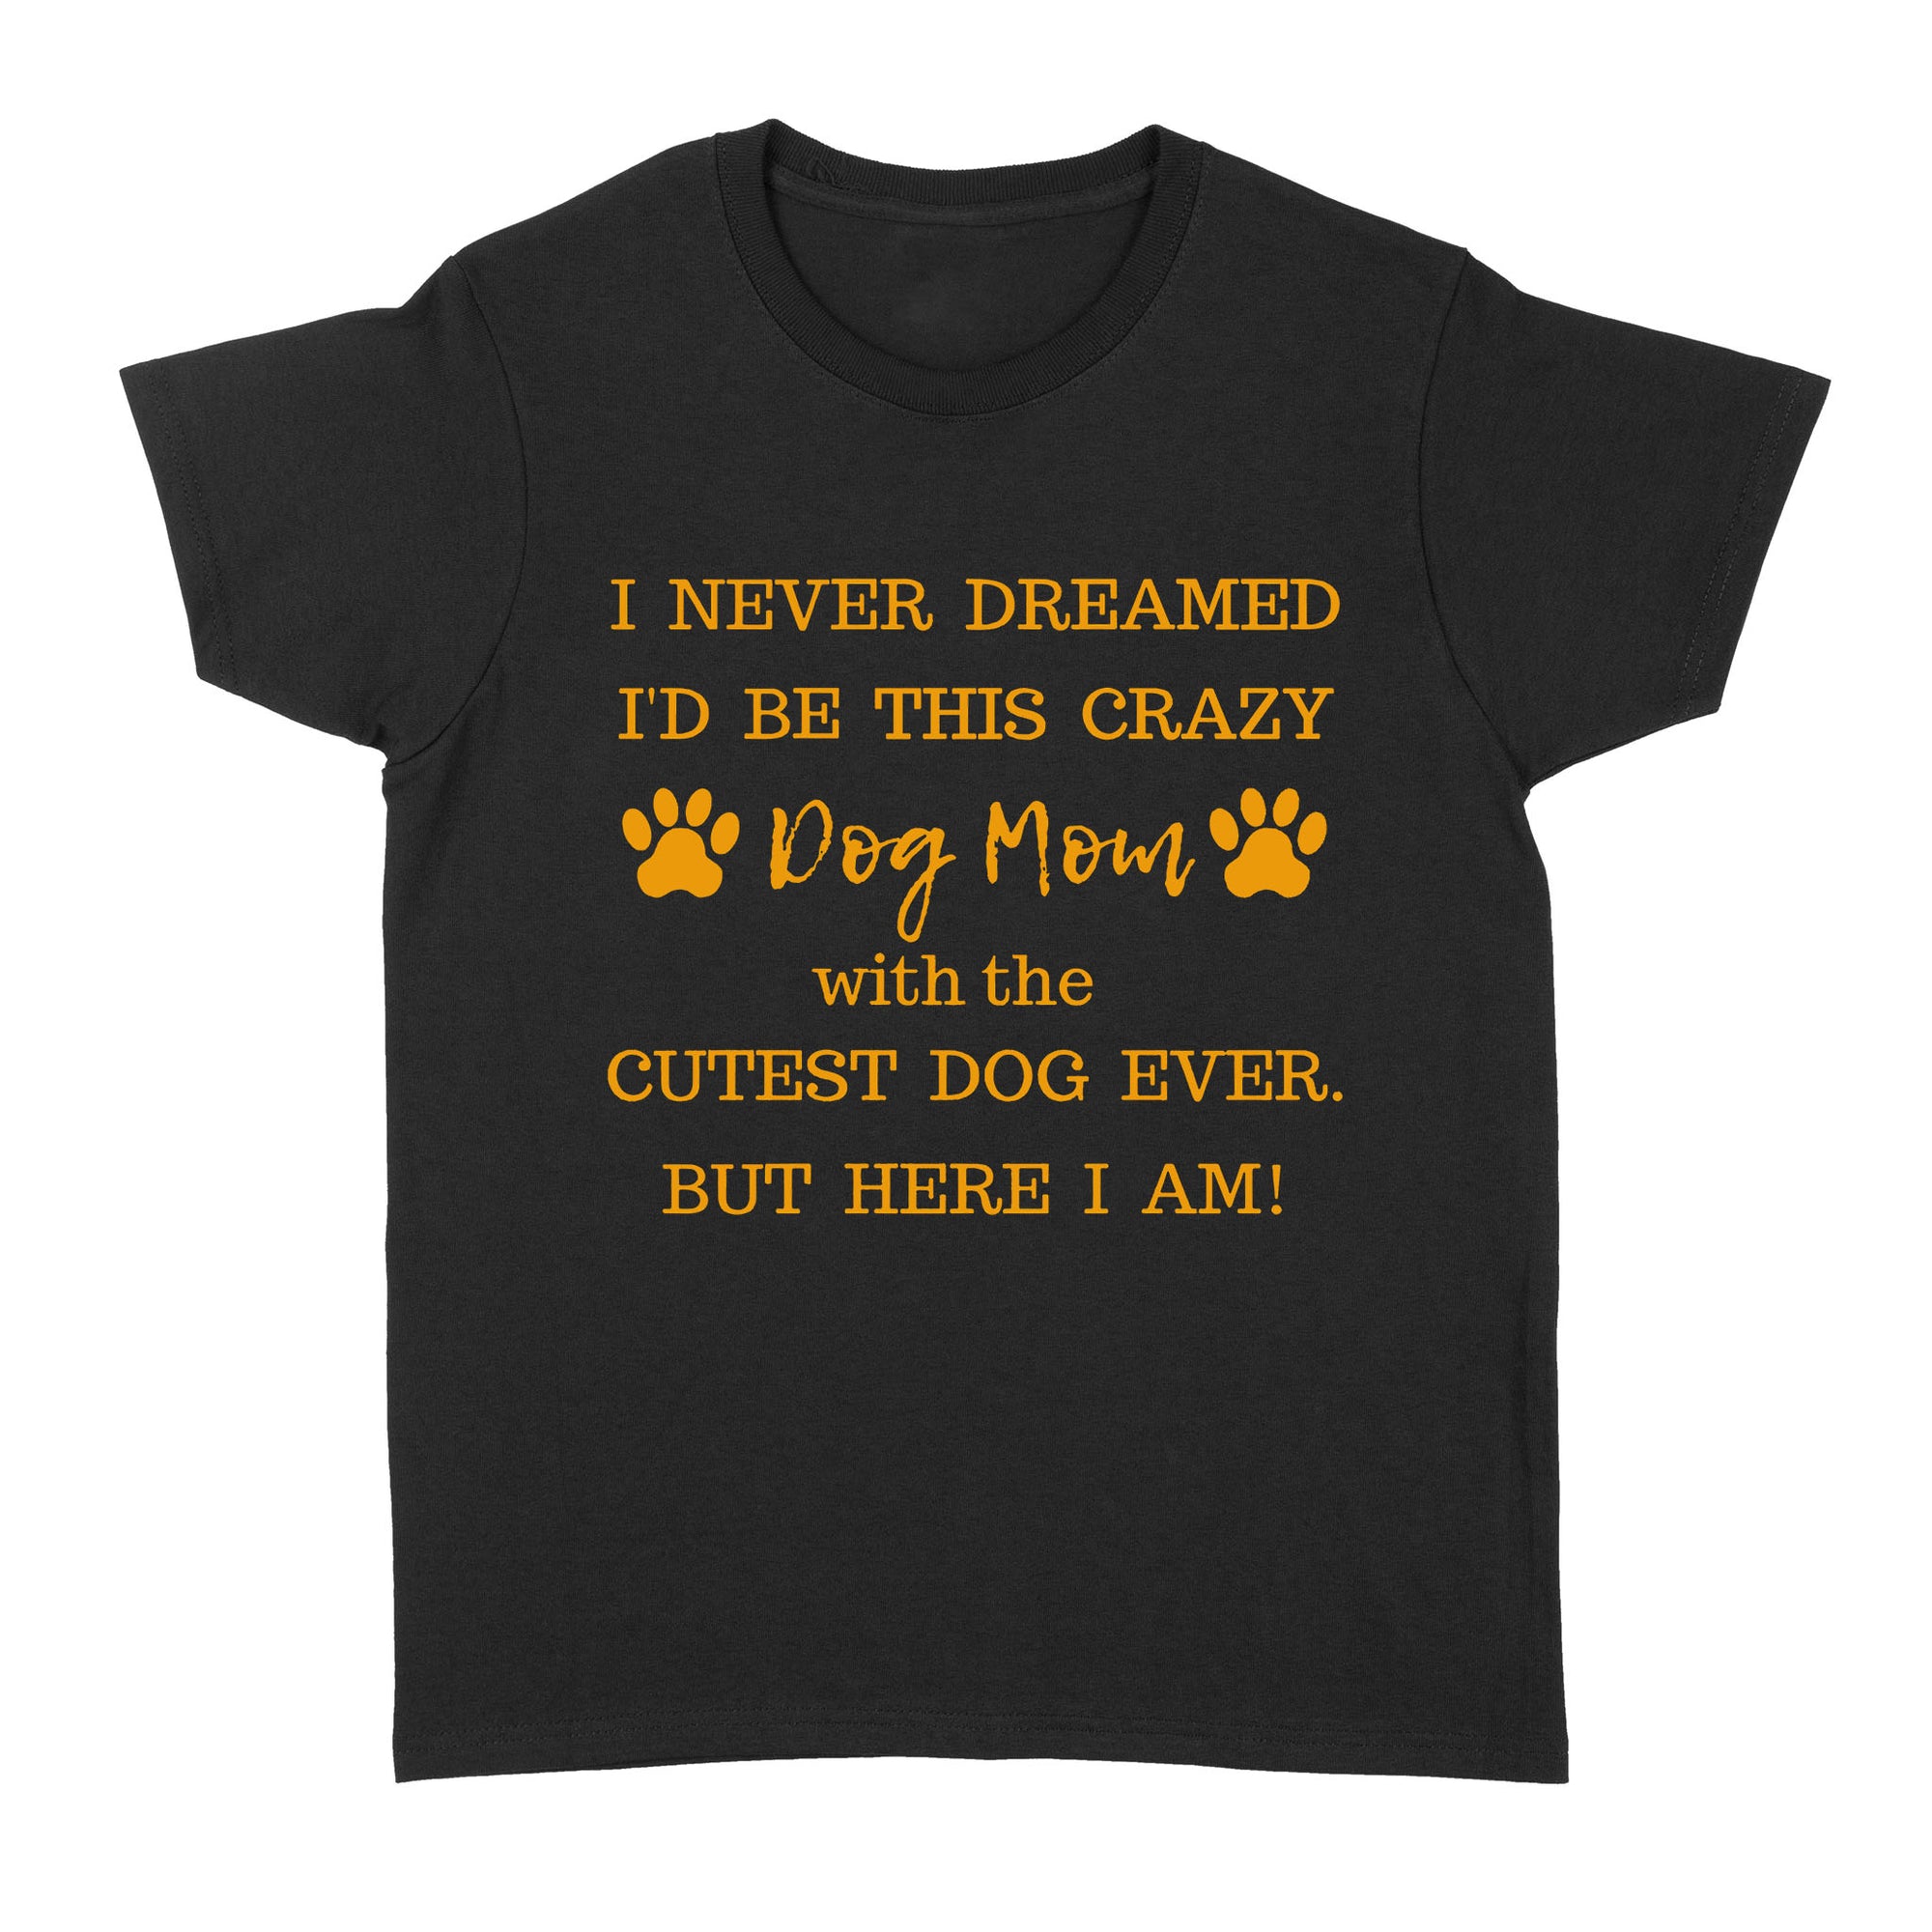 I Never Dreamed I’d Be This Crazy Dog Mom With The Cutest Dogs Ever Standard Women's T-shirt